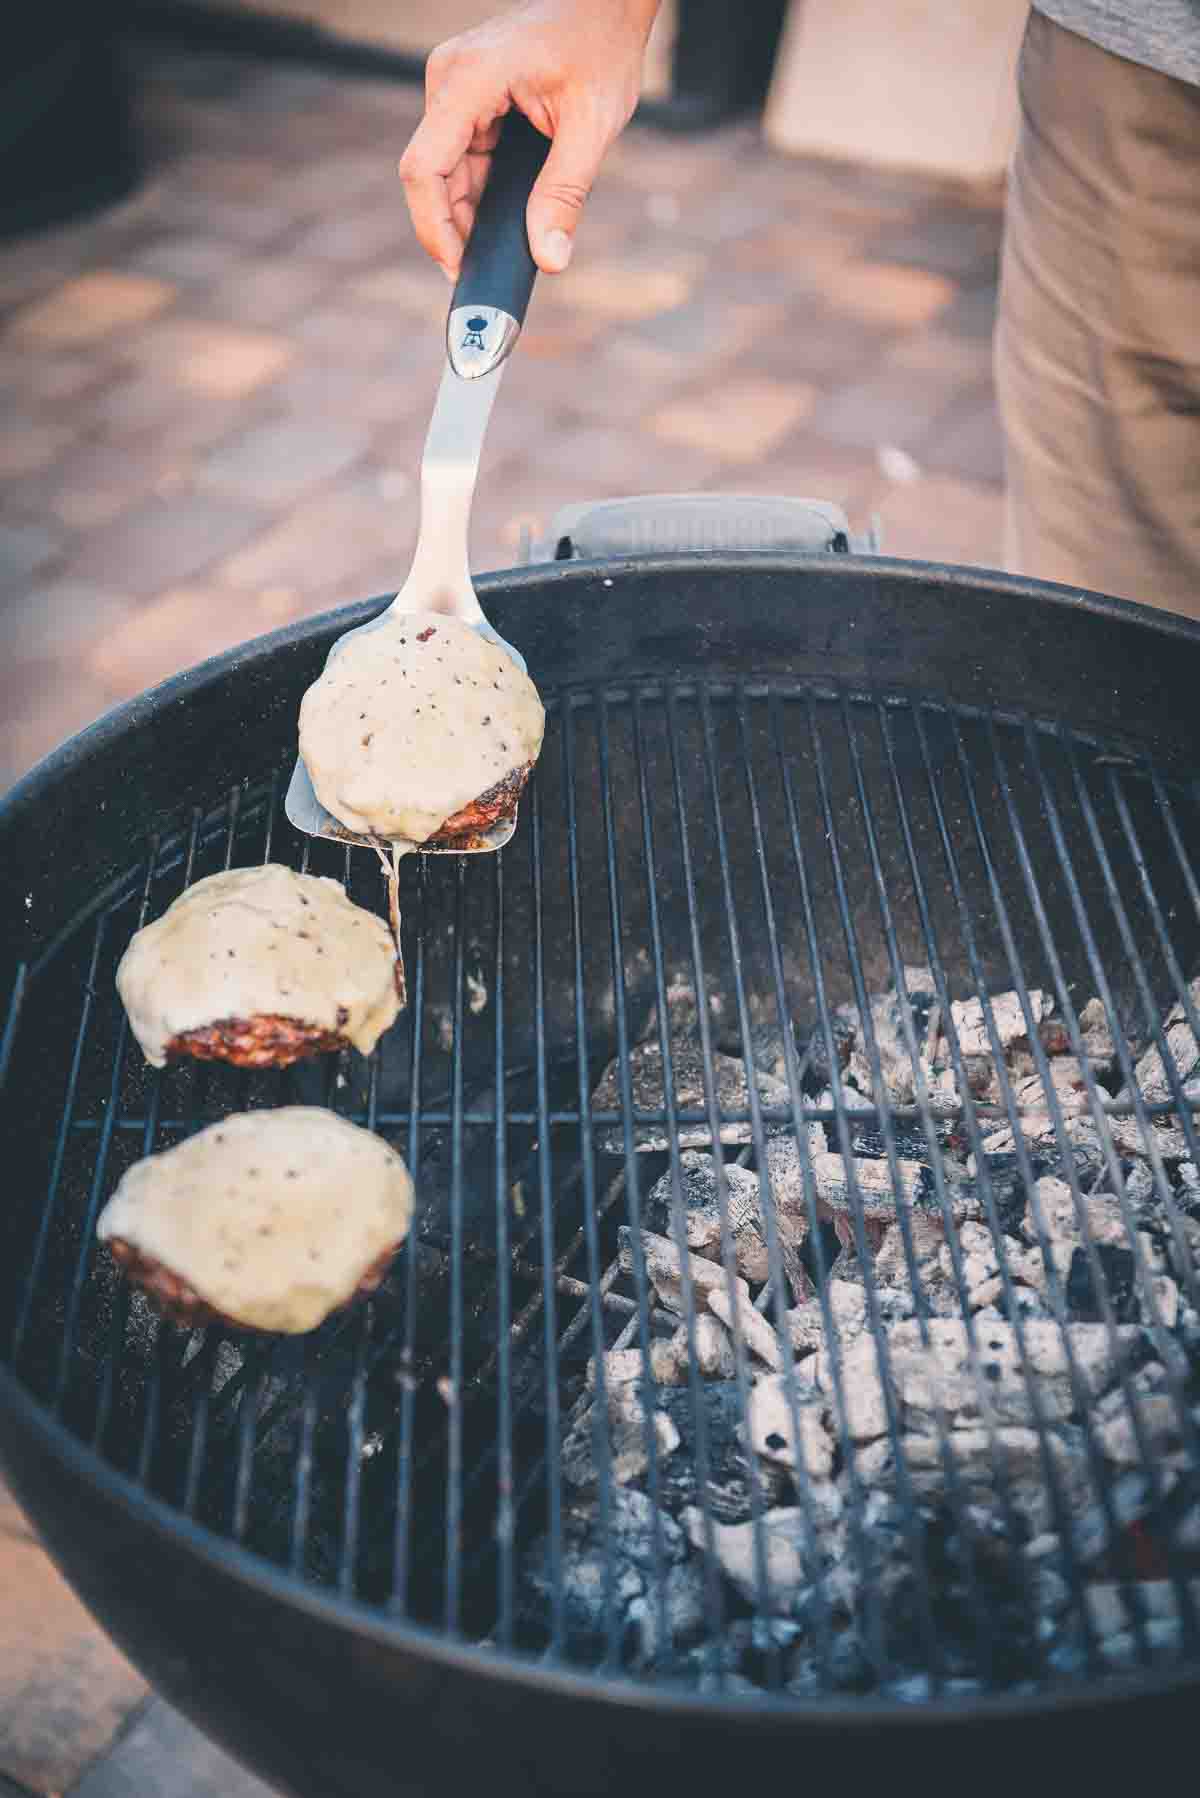 Cheesy burgers coming off the grill.